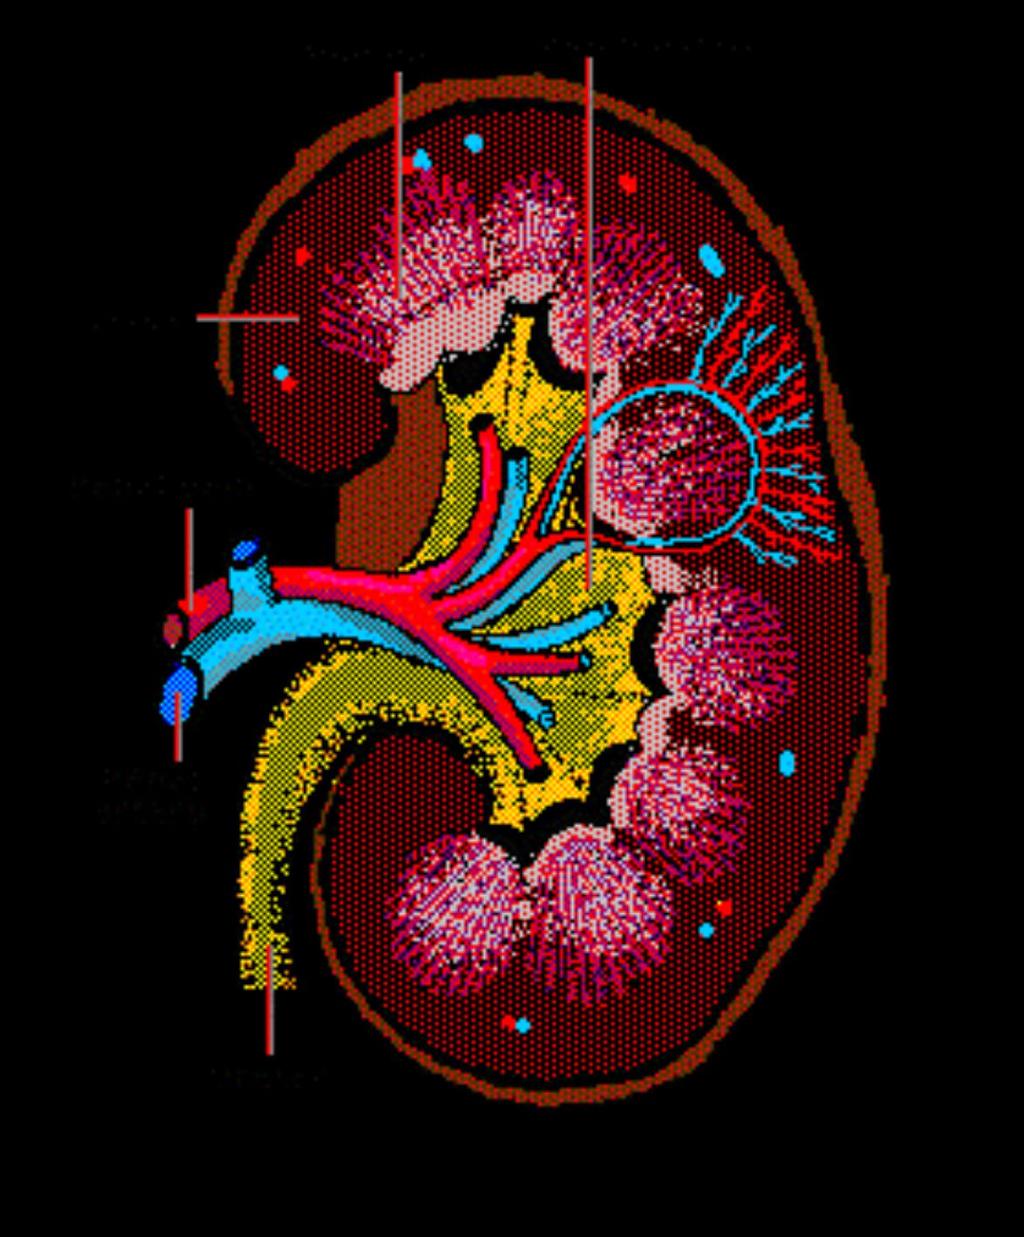 Blood to Urine Blood travels through renal artery to cortex Cortex to the nephrons (filtering units) Nephrons have glomerulus (with blood